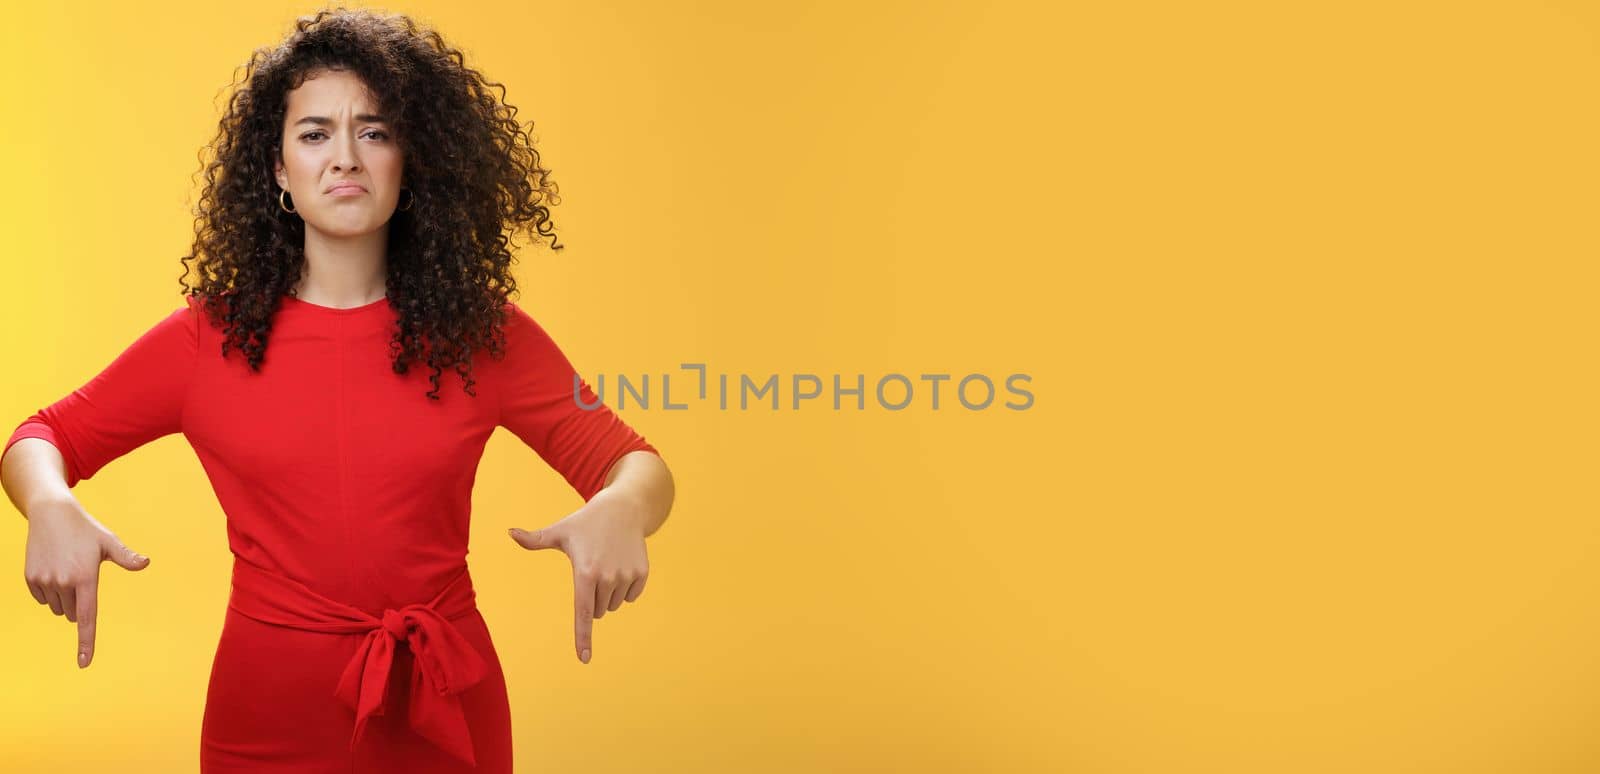 Gloomy disappointed cute silly curly-haired female in red dress frowning upset and making sad smile as pointing down with regret and unsatisfied expression, jealous or displeased over yellow wall.